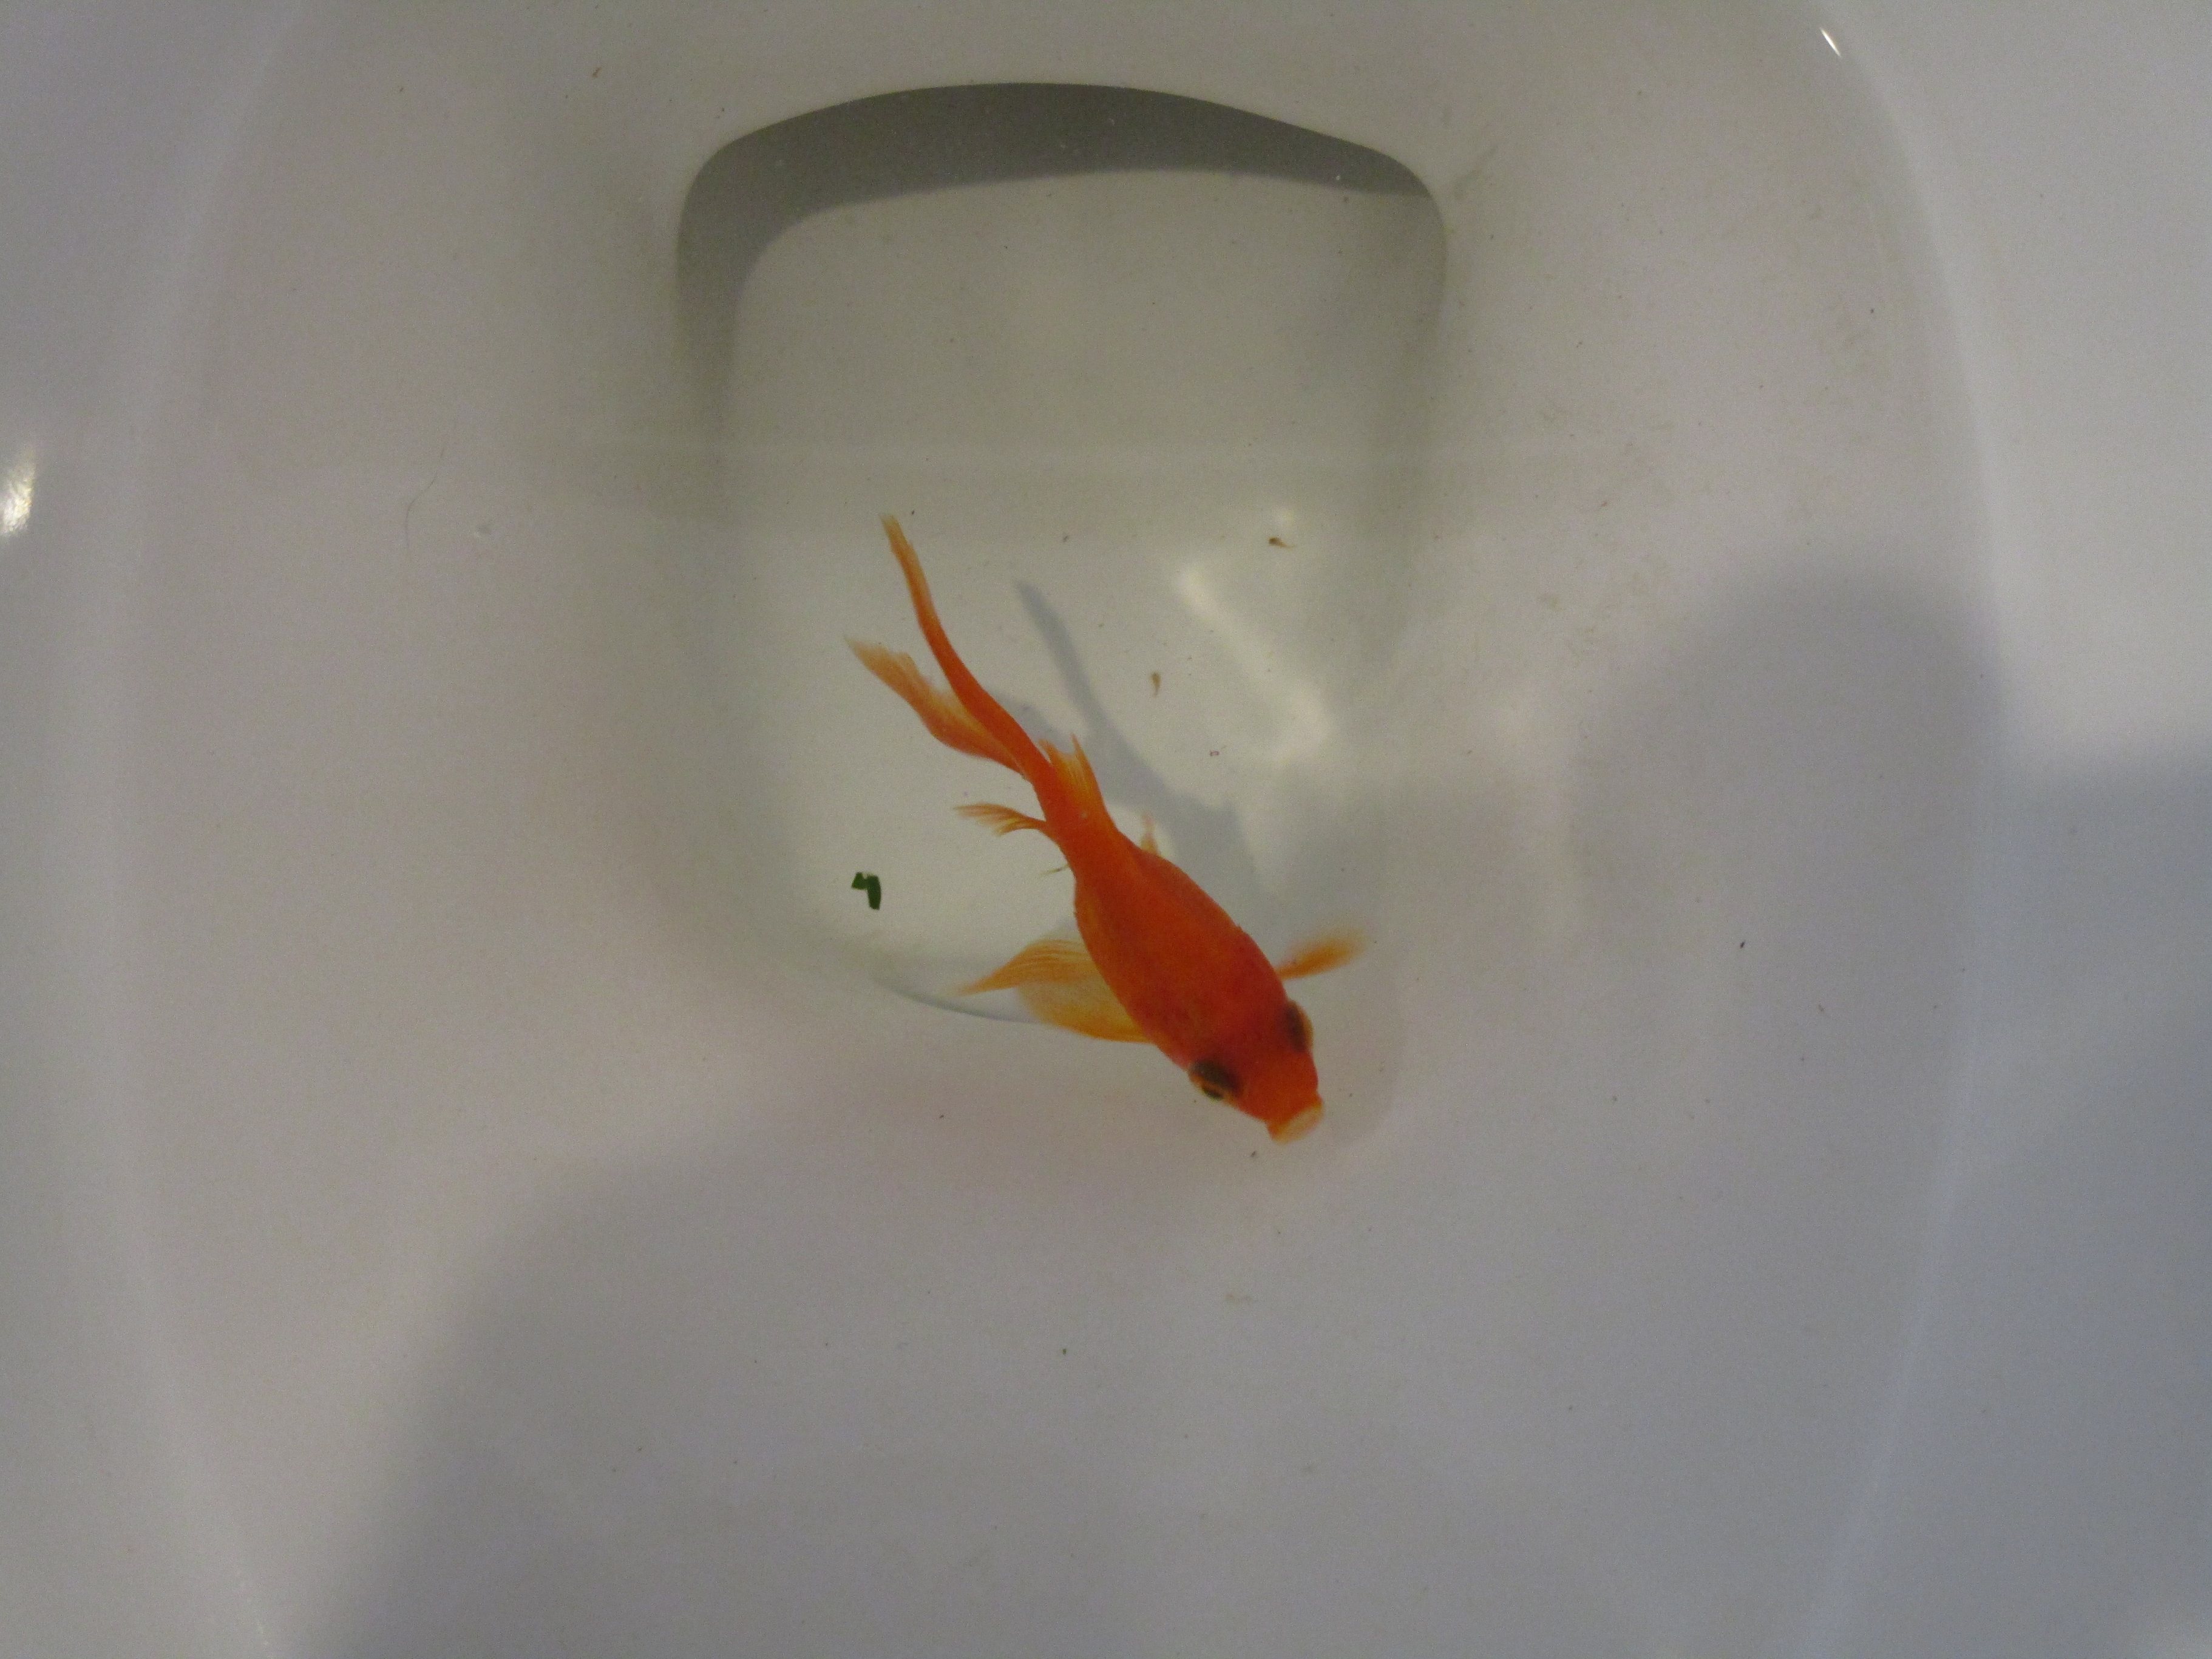 A goldfish swimming in a toilet bowl